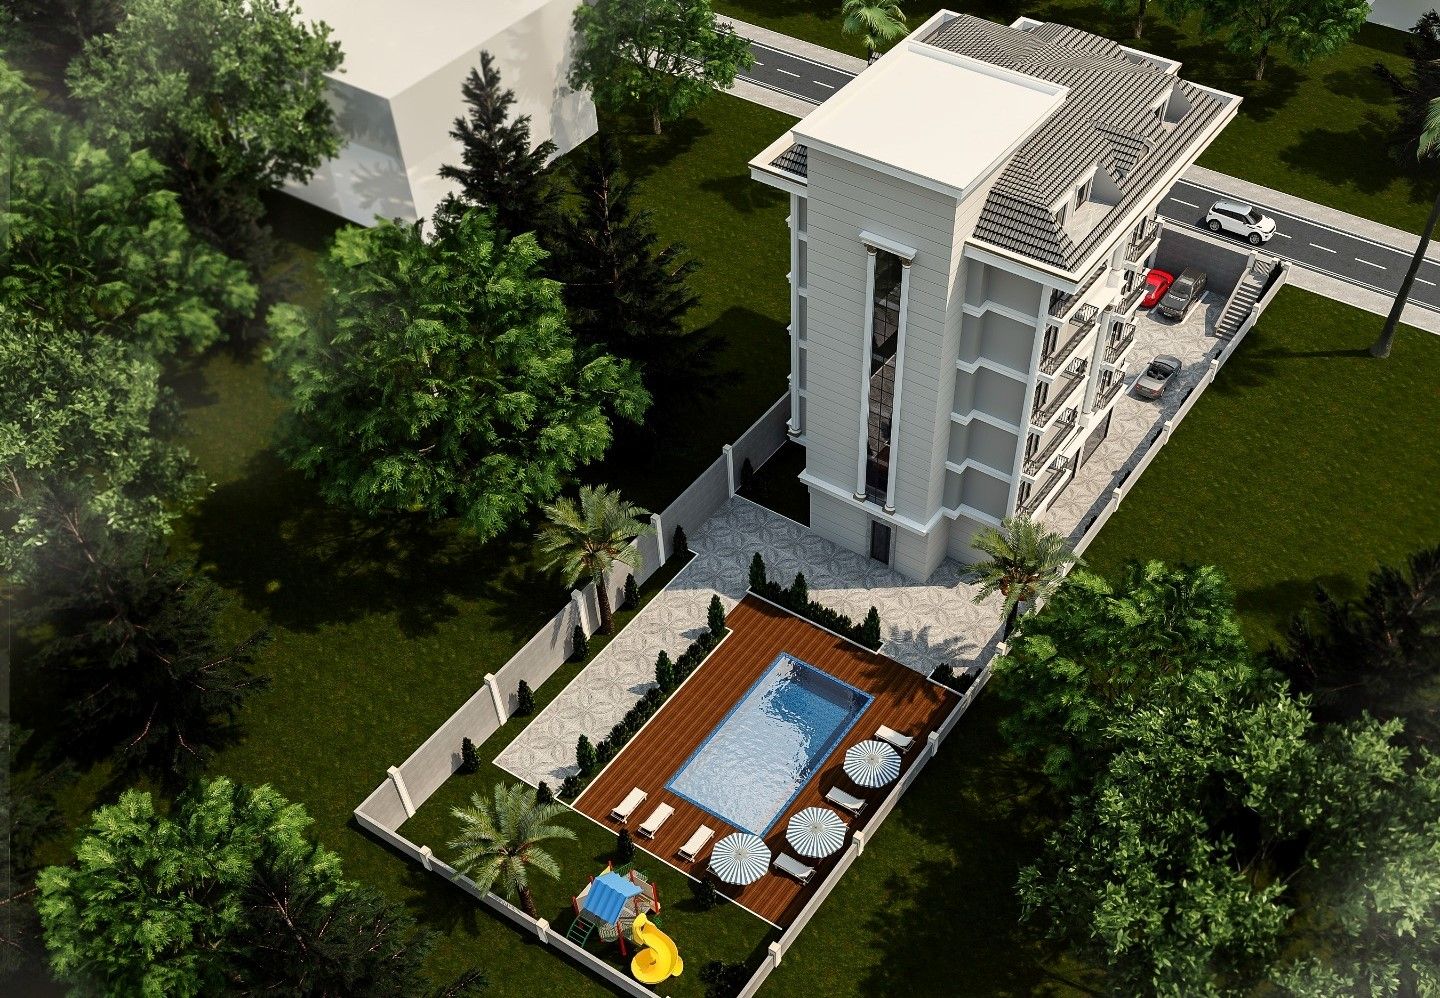 Apartment 1+1 in new complex - Kestel district, Alanya